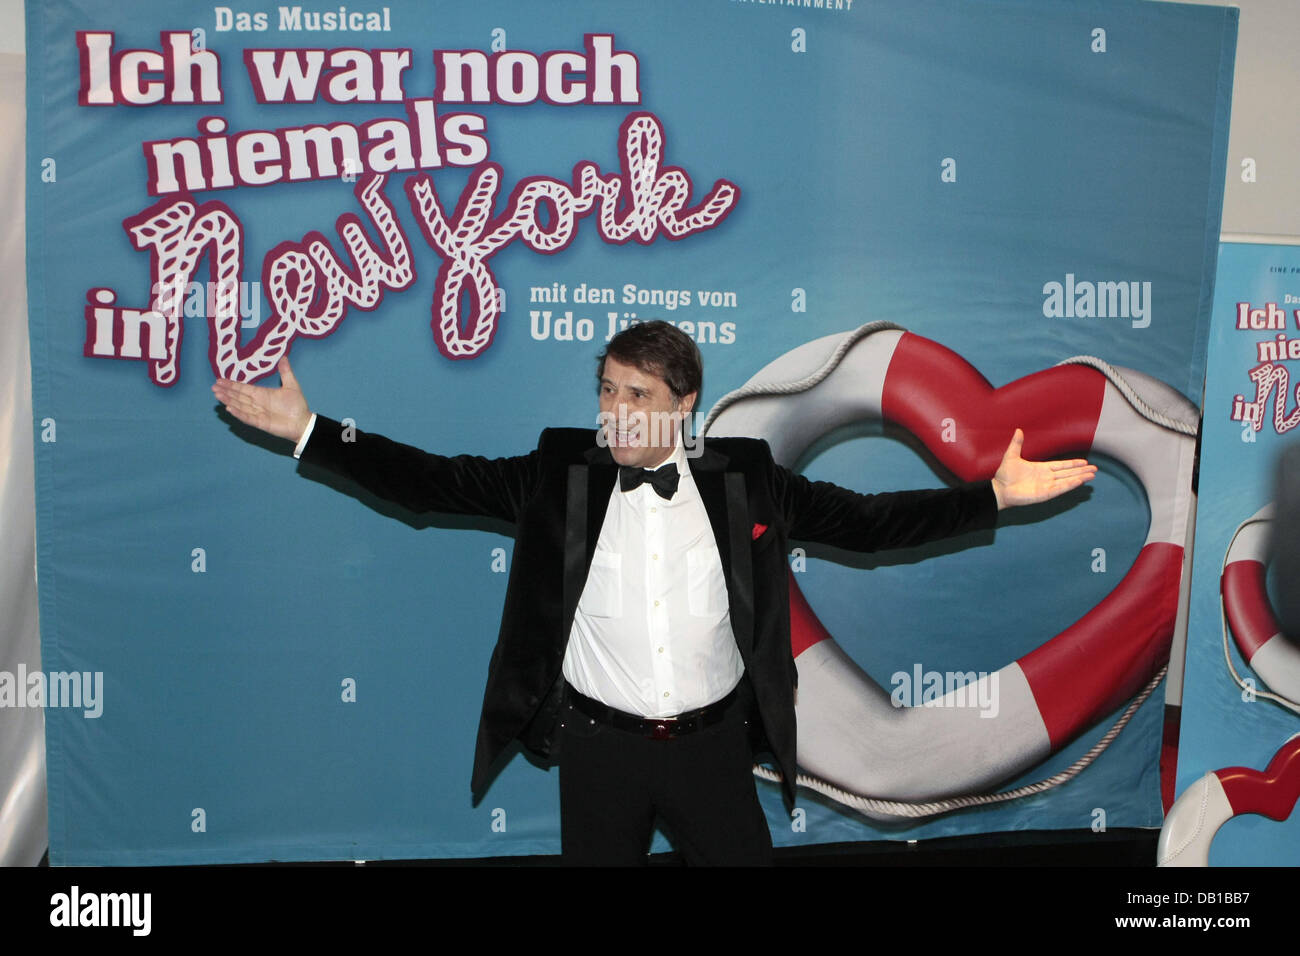 Udo Juergens poses for photographers at the premiere of the musical 'Ich war noch niemals in New York' (lit.: I have never been to New York) based on his songs at TUI Operetta House in Hamburg, Germany, 02 December 2007. 38 actors perform several of Juergens' songs during the musical. Photo: ULRICH PERREY Stock Photo